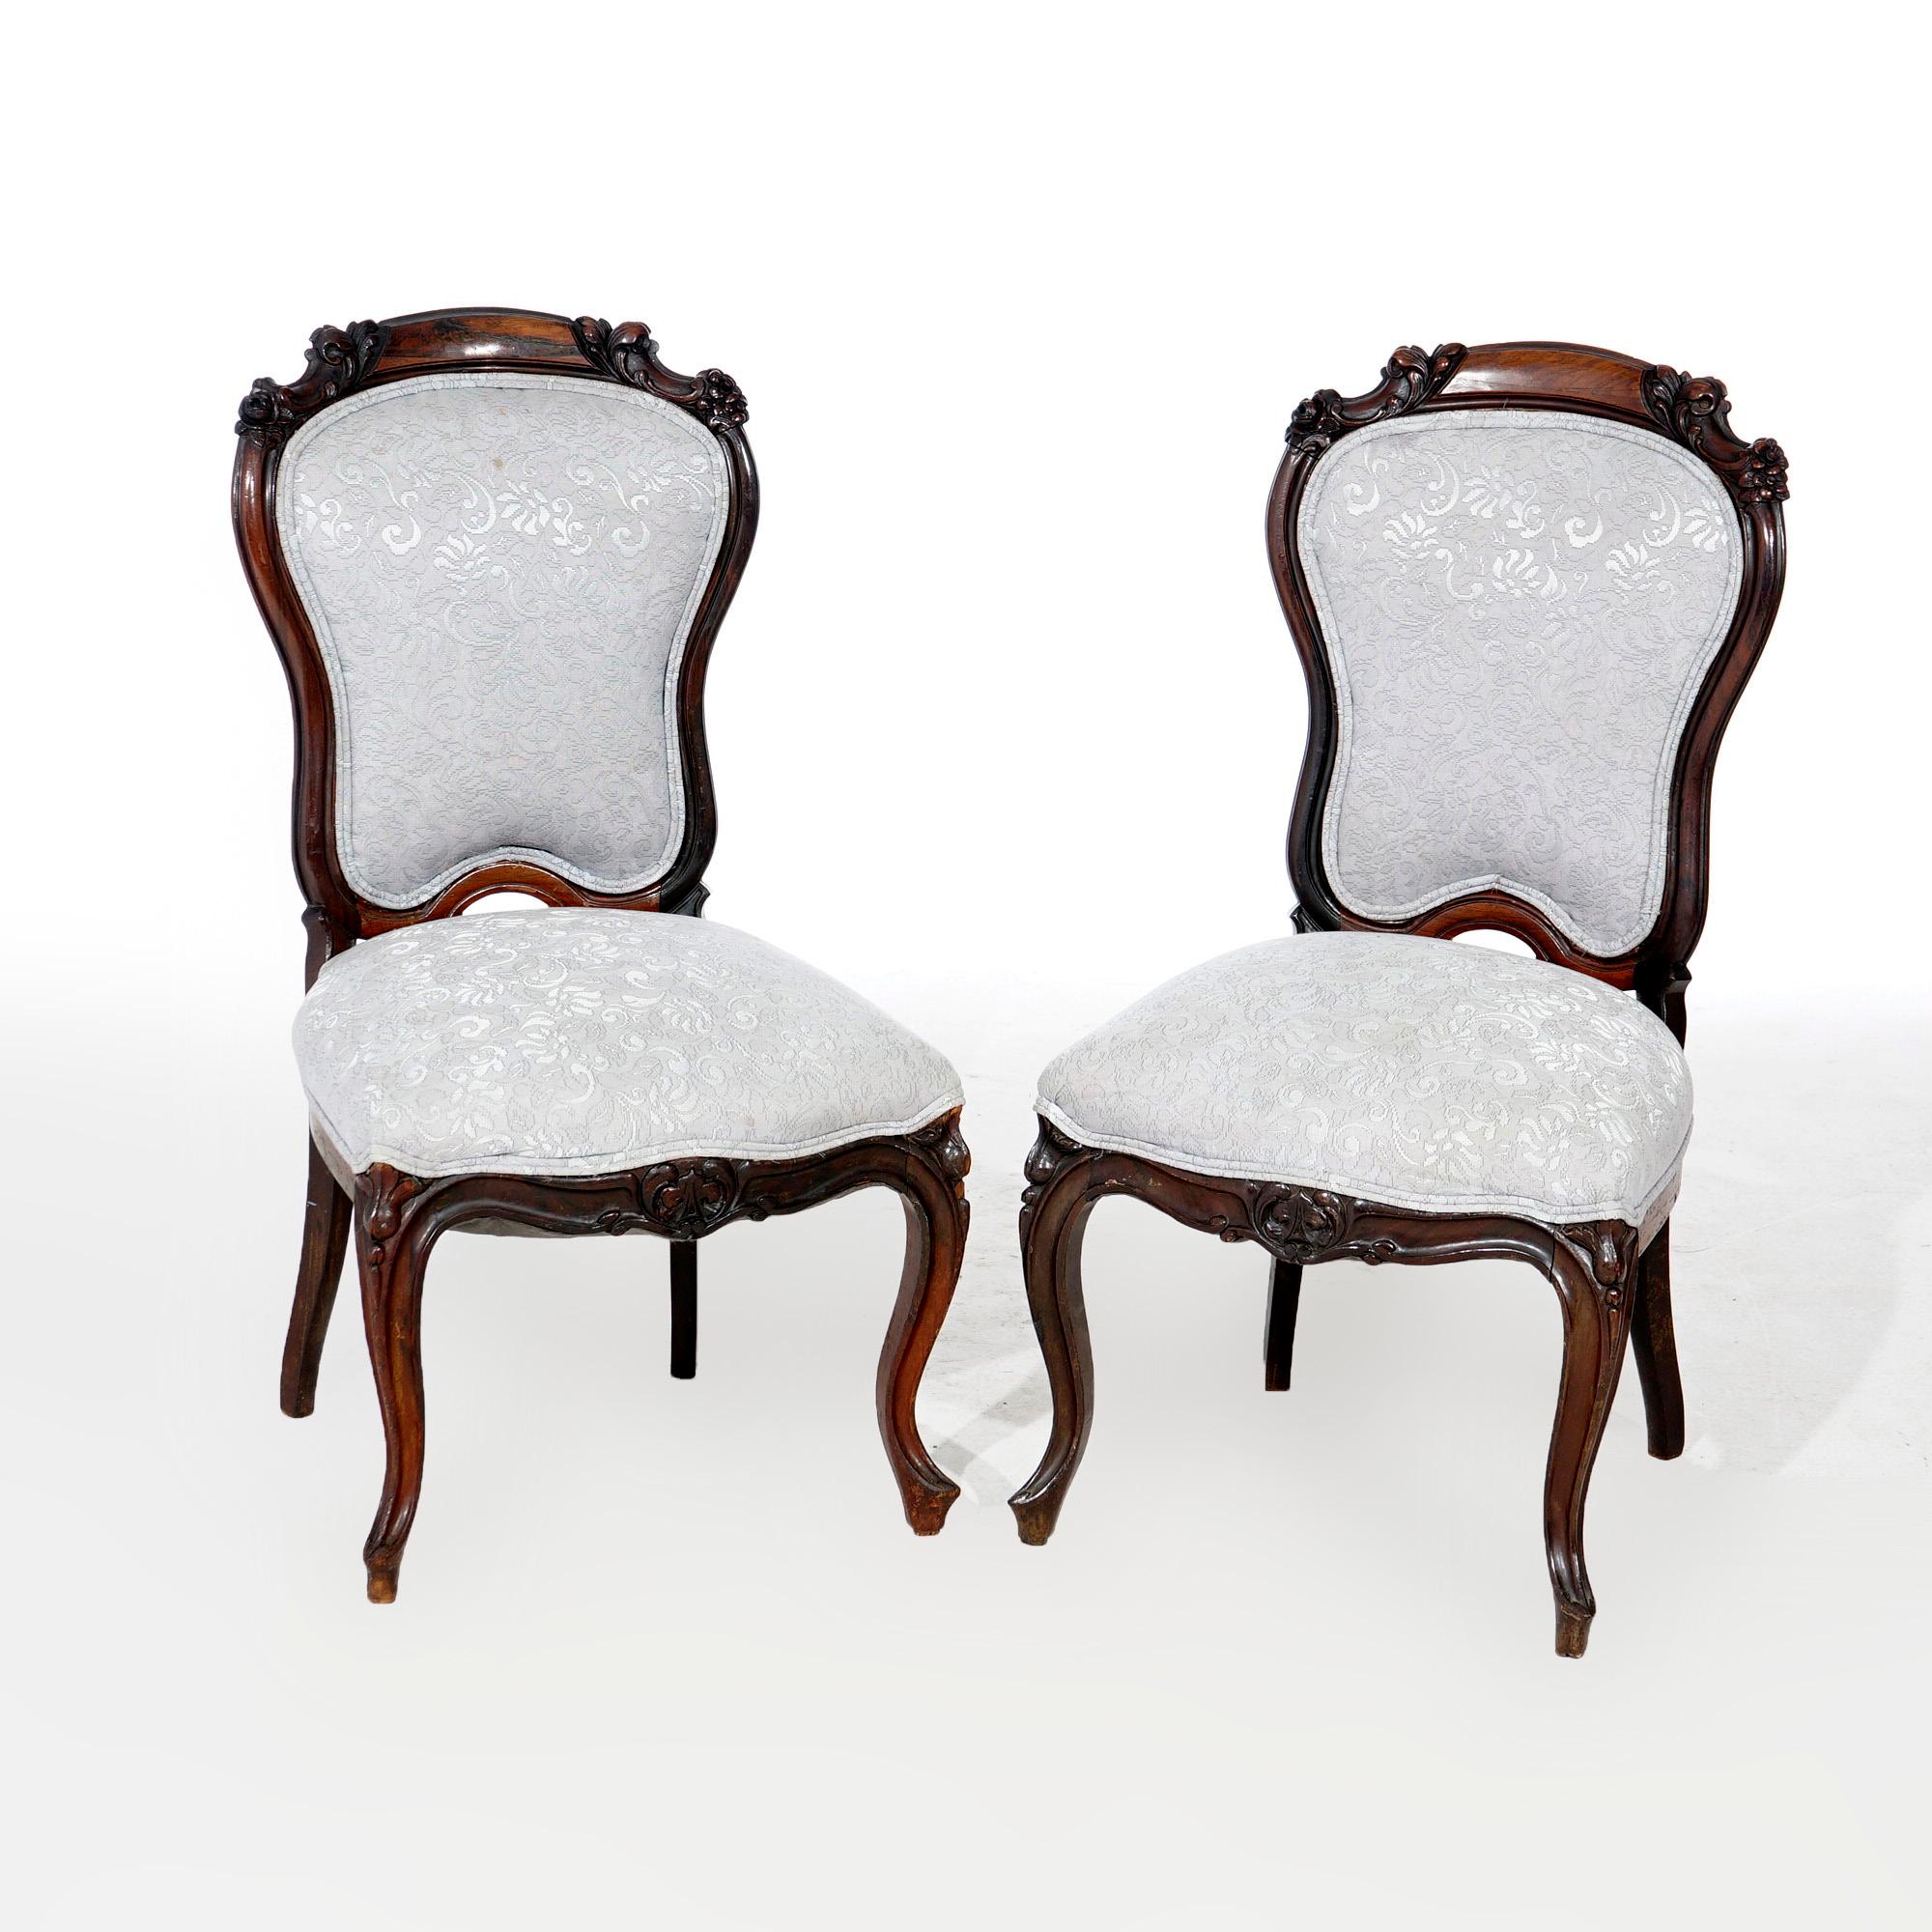 An antique pair of Victorian parlor side chairs offer mahogany construction with carved foliate elements, upholstered backs and seats, raised on cabriole legs, 19th century.

Measures- 36.25''H x 19.25''W x 21''D; 19'' seat height.